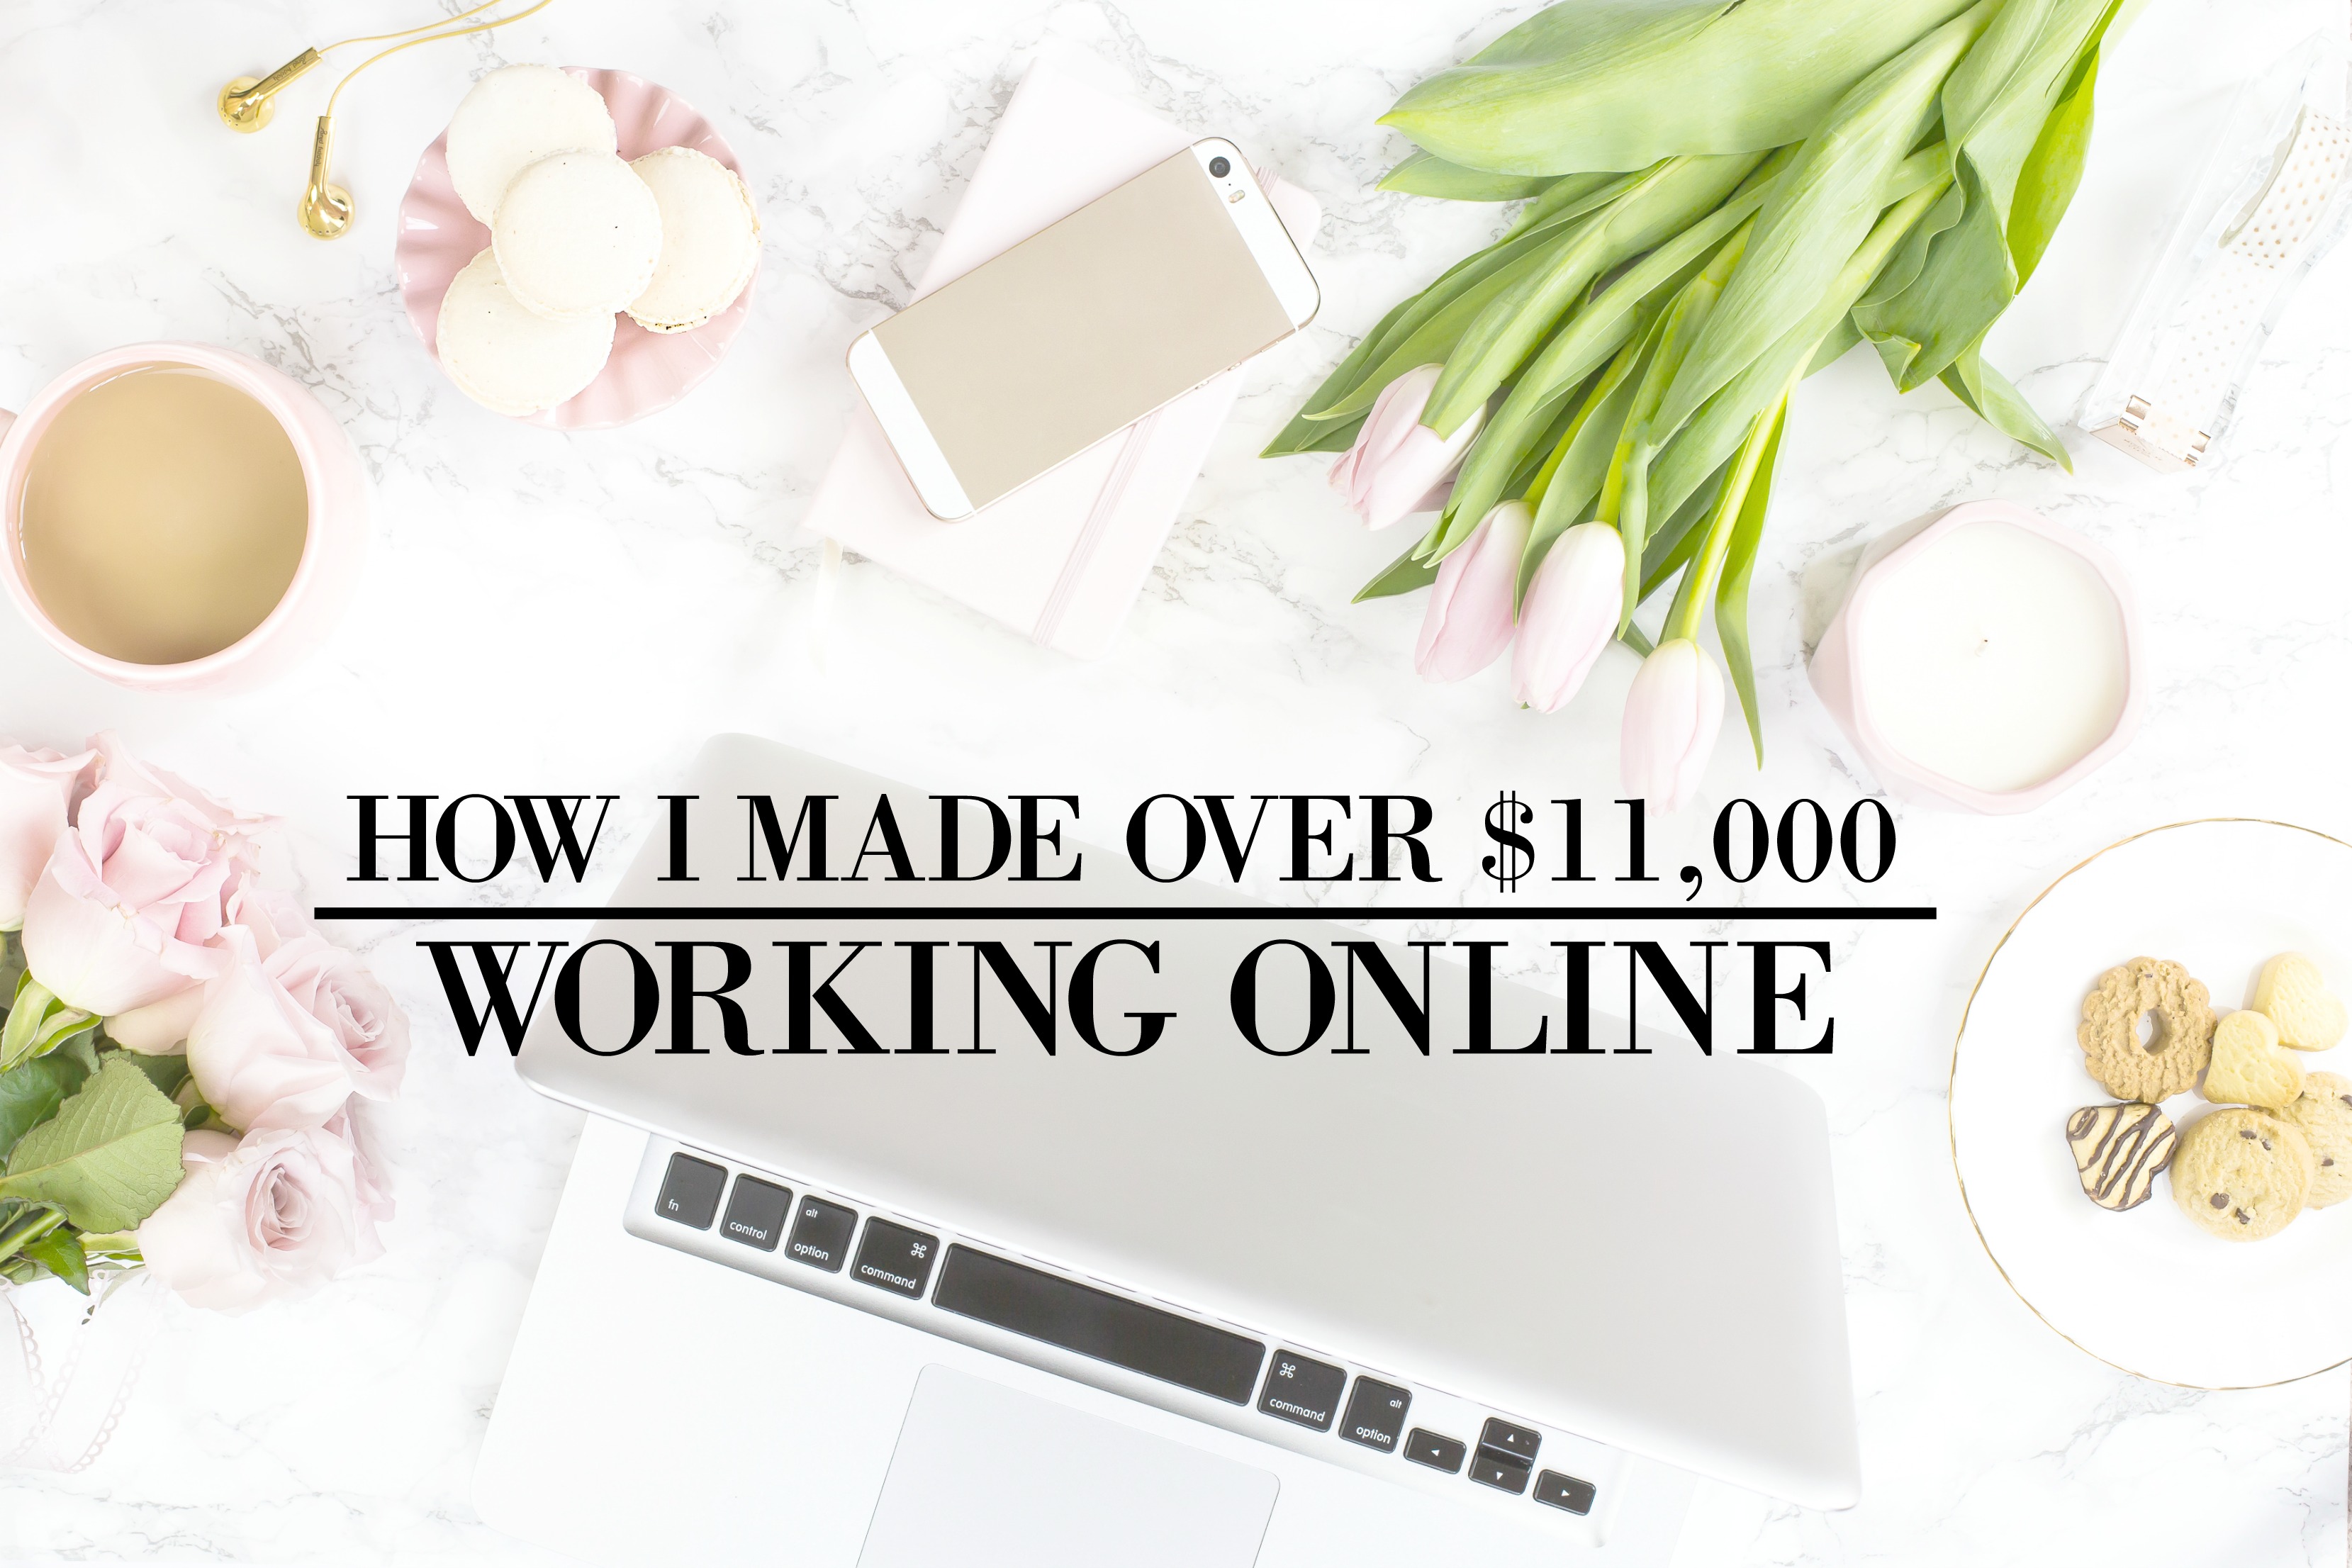 How I Made Over $11,000 Working Online